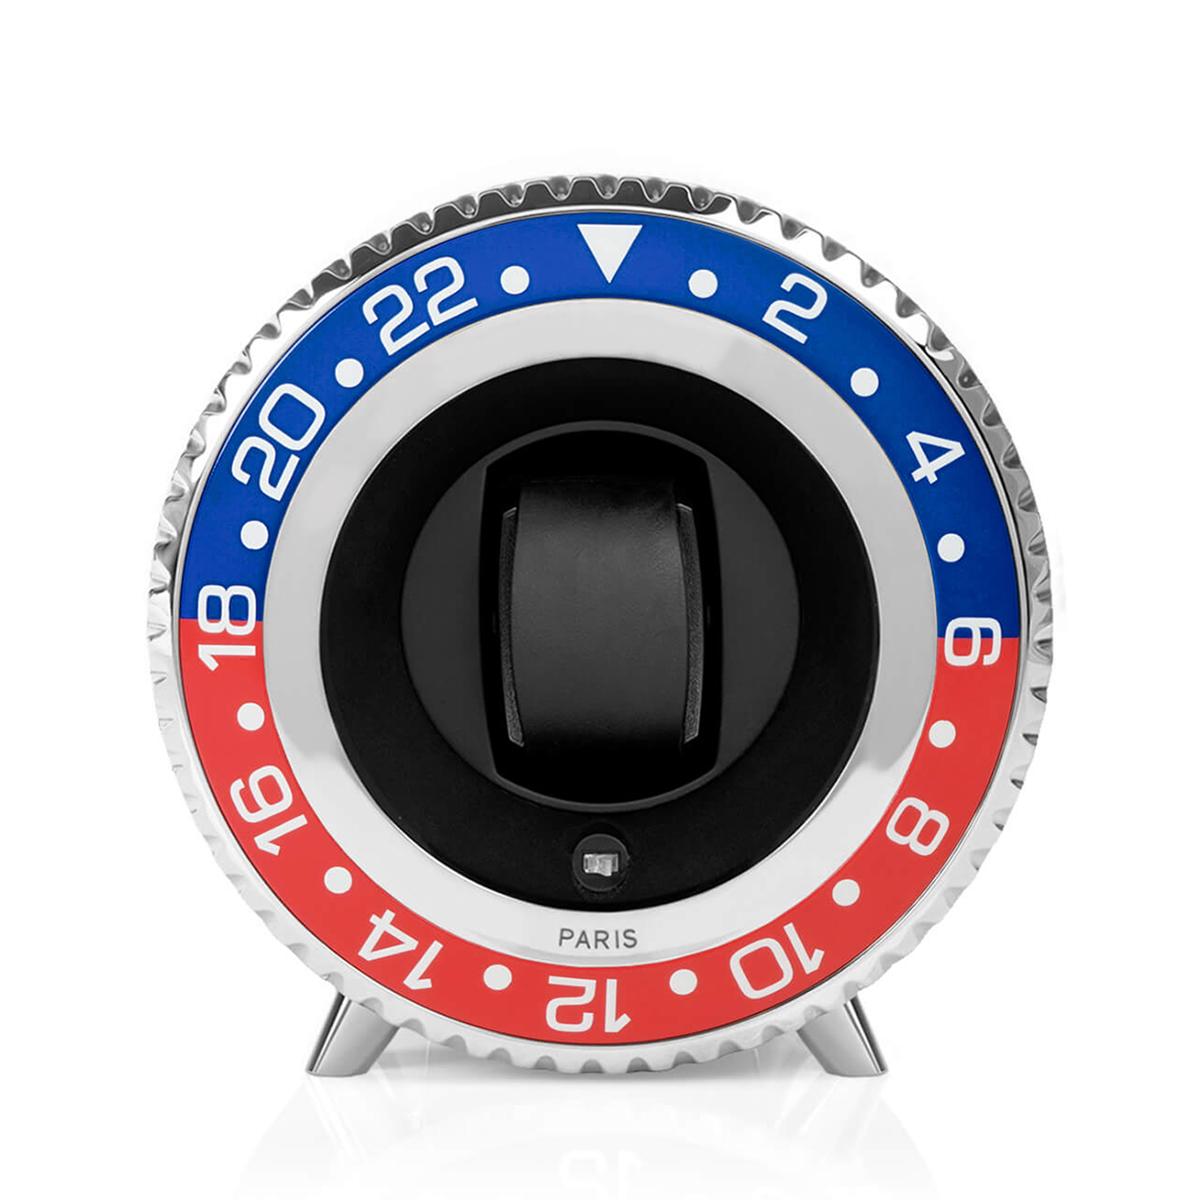 Watch winder red leather with bezel in blue and red aluminum, structure
in aluminum in nickel finish. Rotating small case for automatic watches
covered with red calfskin in nickel finish. Integrated watch winder with a
cycle of 1600 revolution